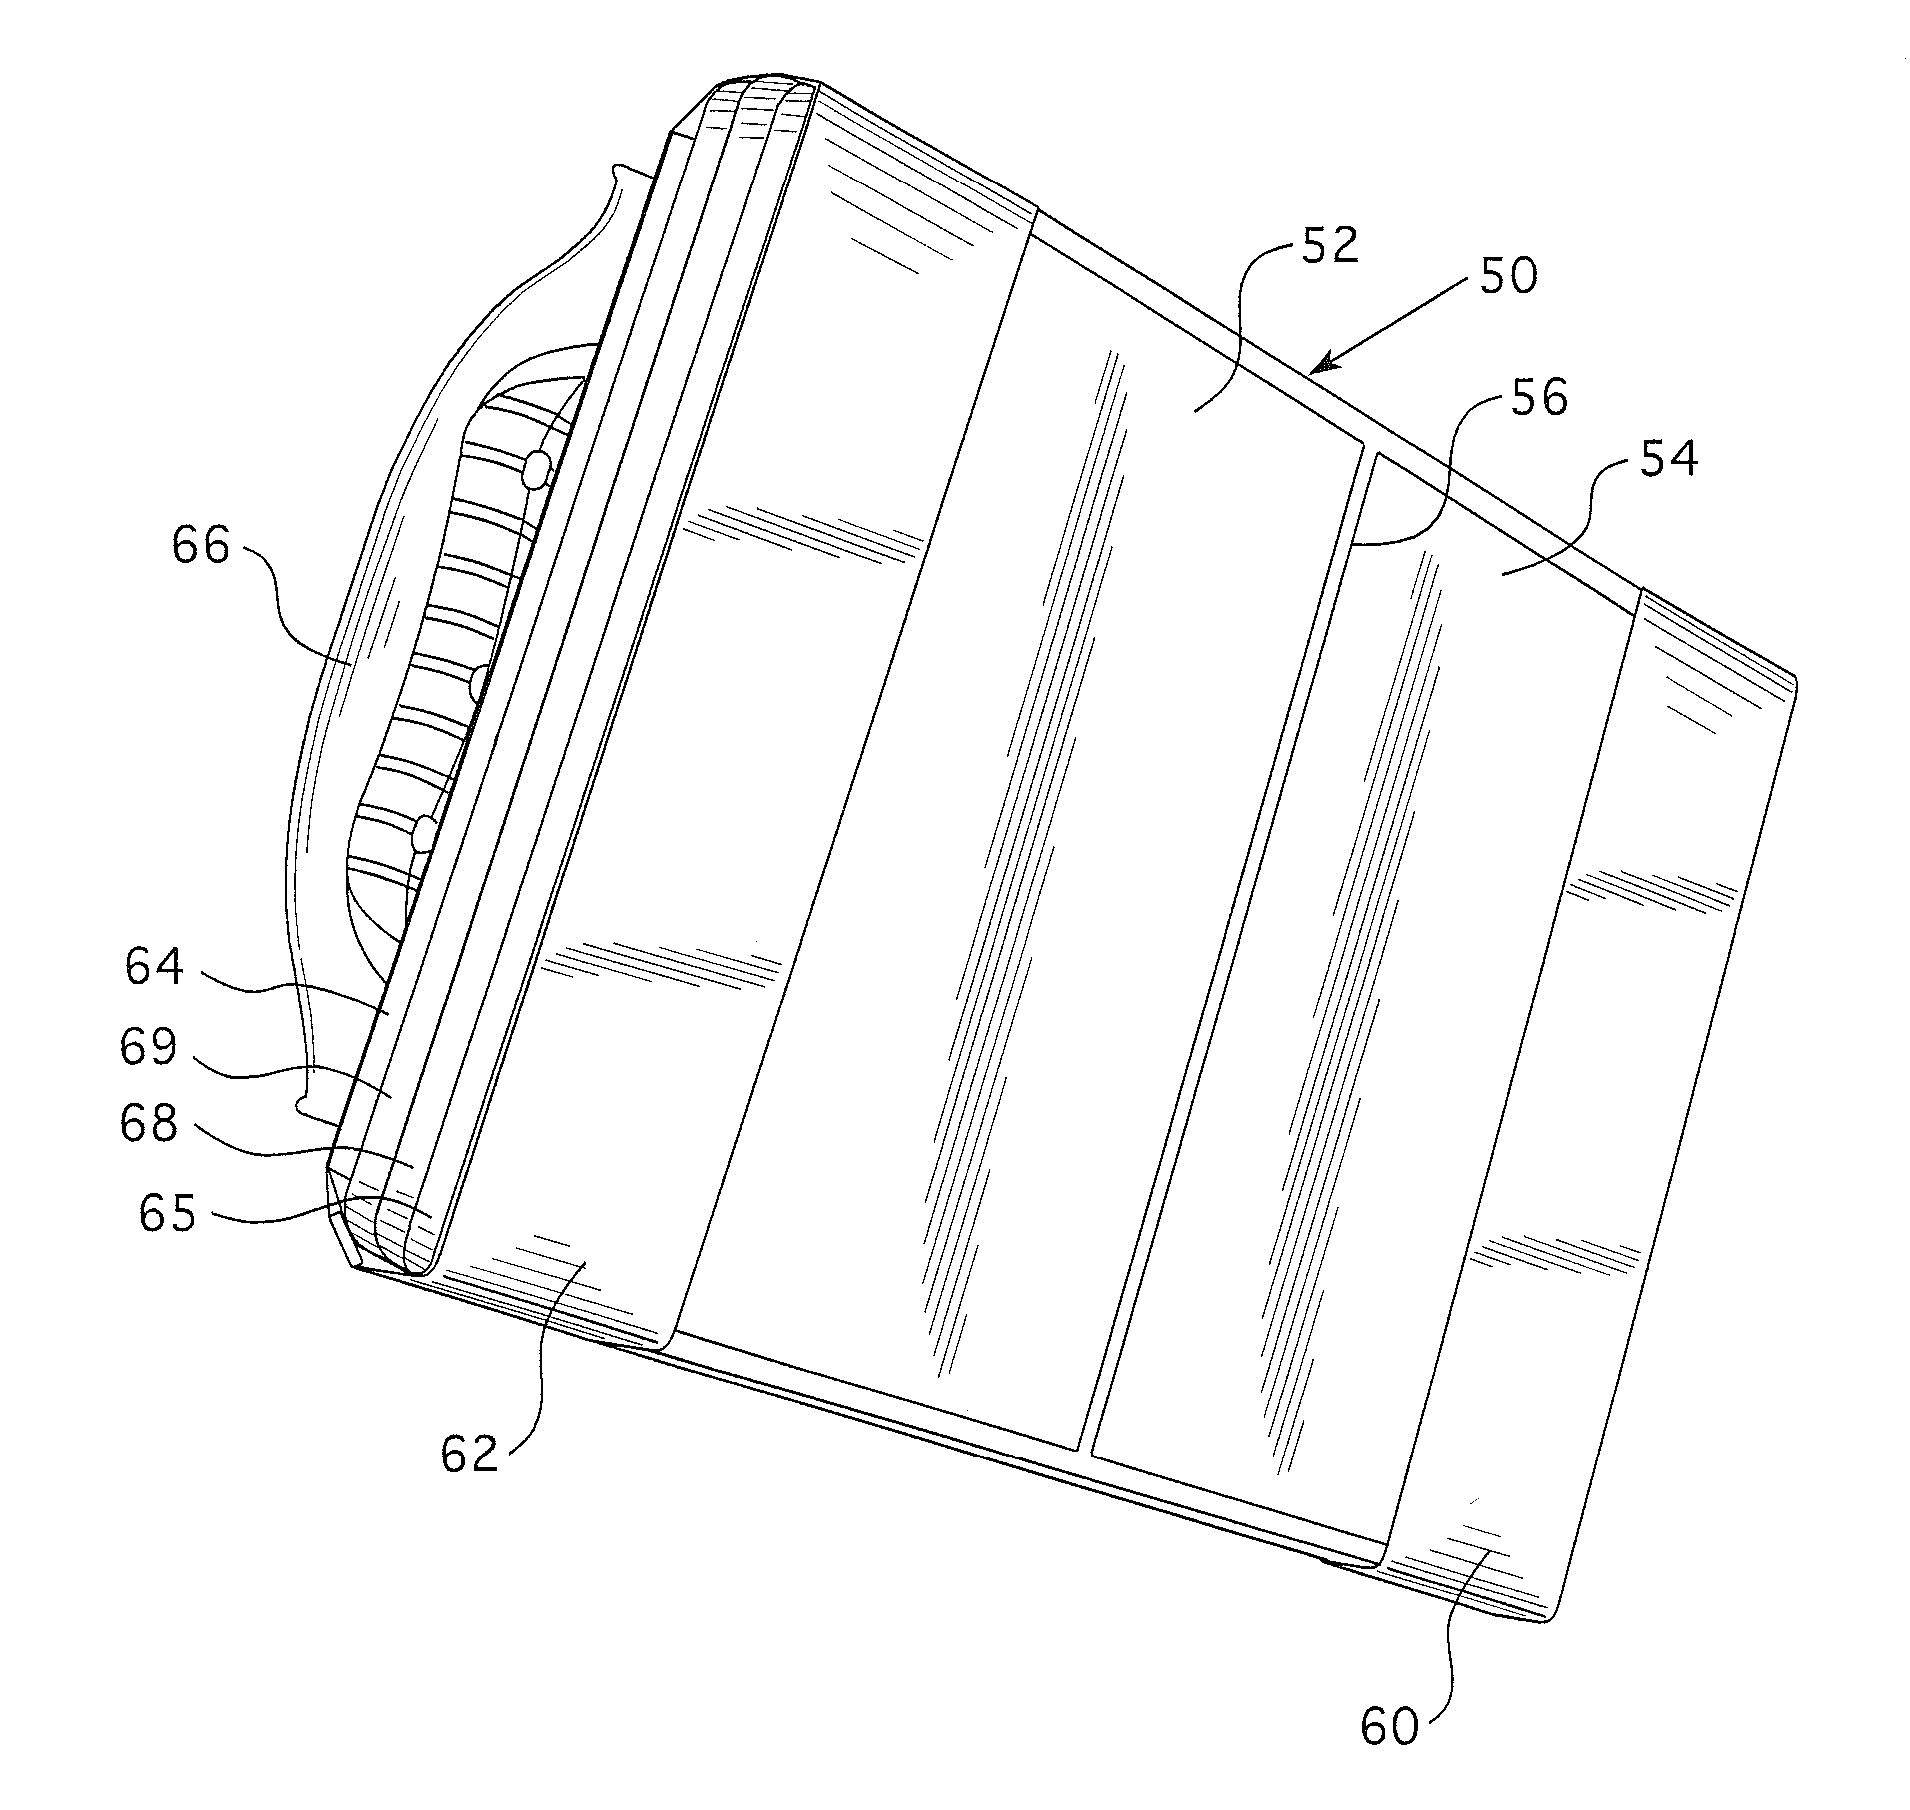 Apparatus for holding a martial arts board and related methods